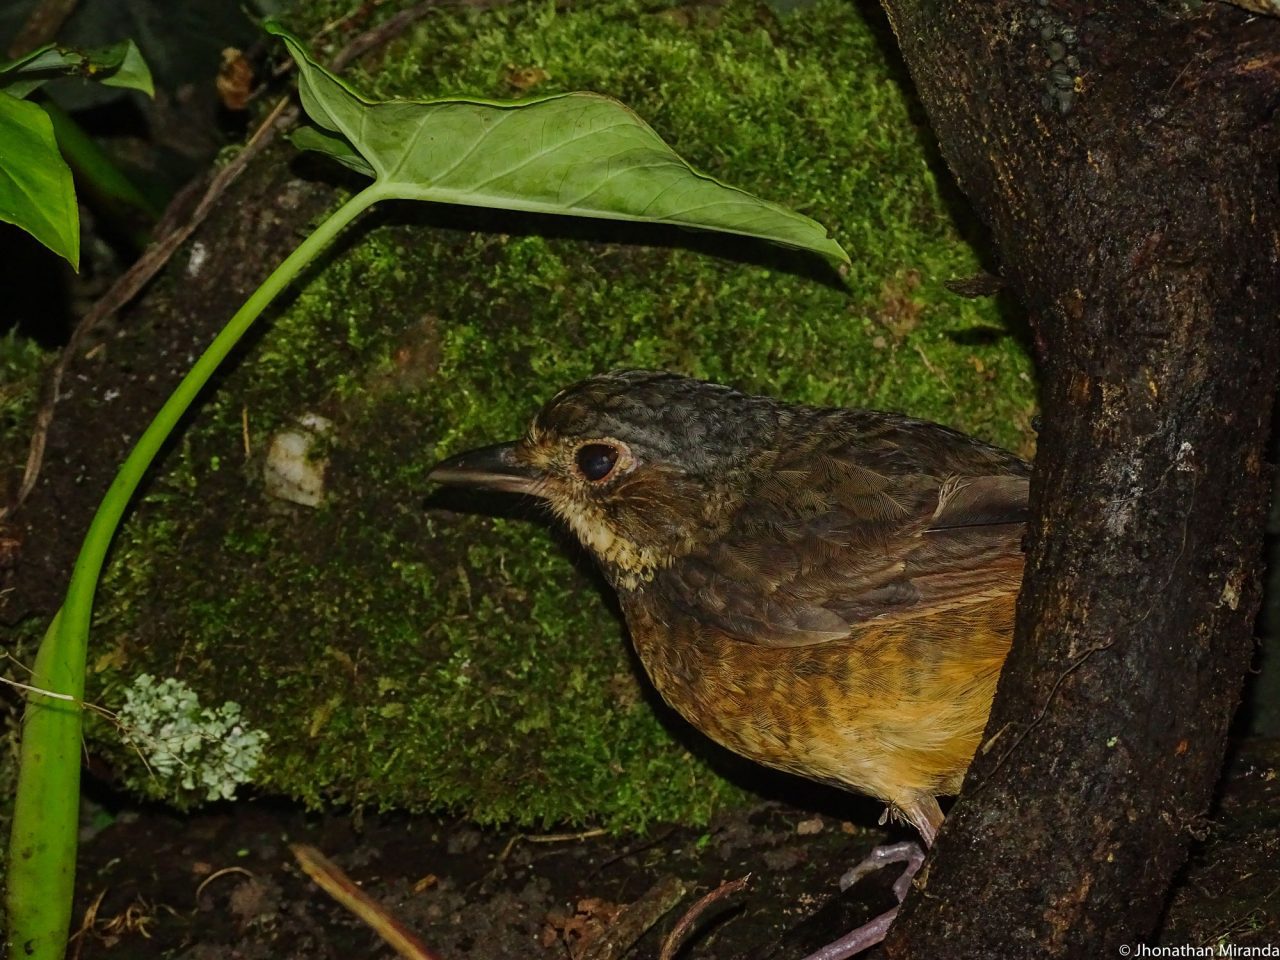 first ever Táchira Antpitta photo from the wild, by Jhonathan Miranda